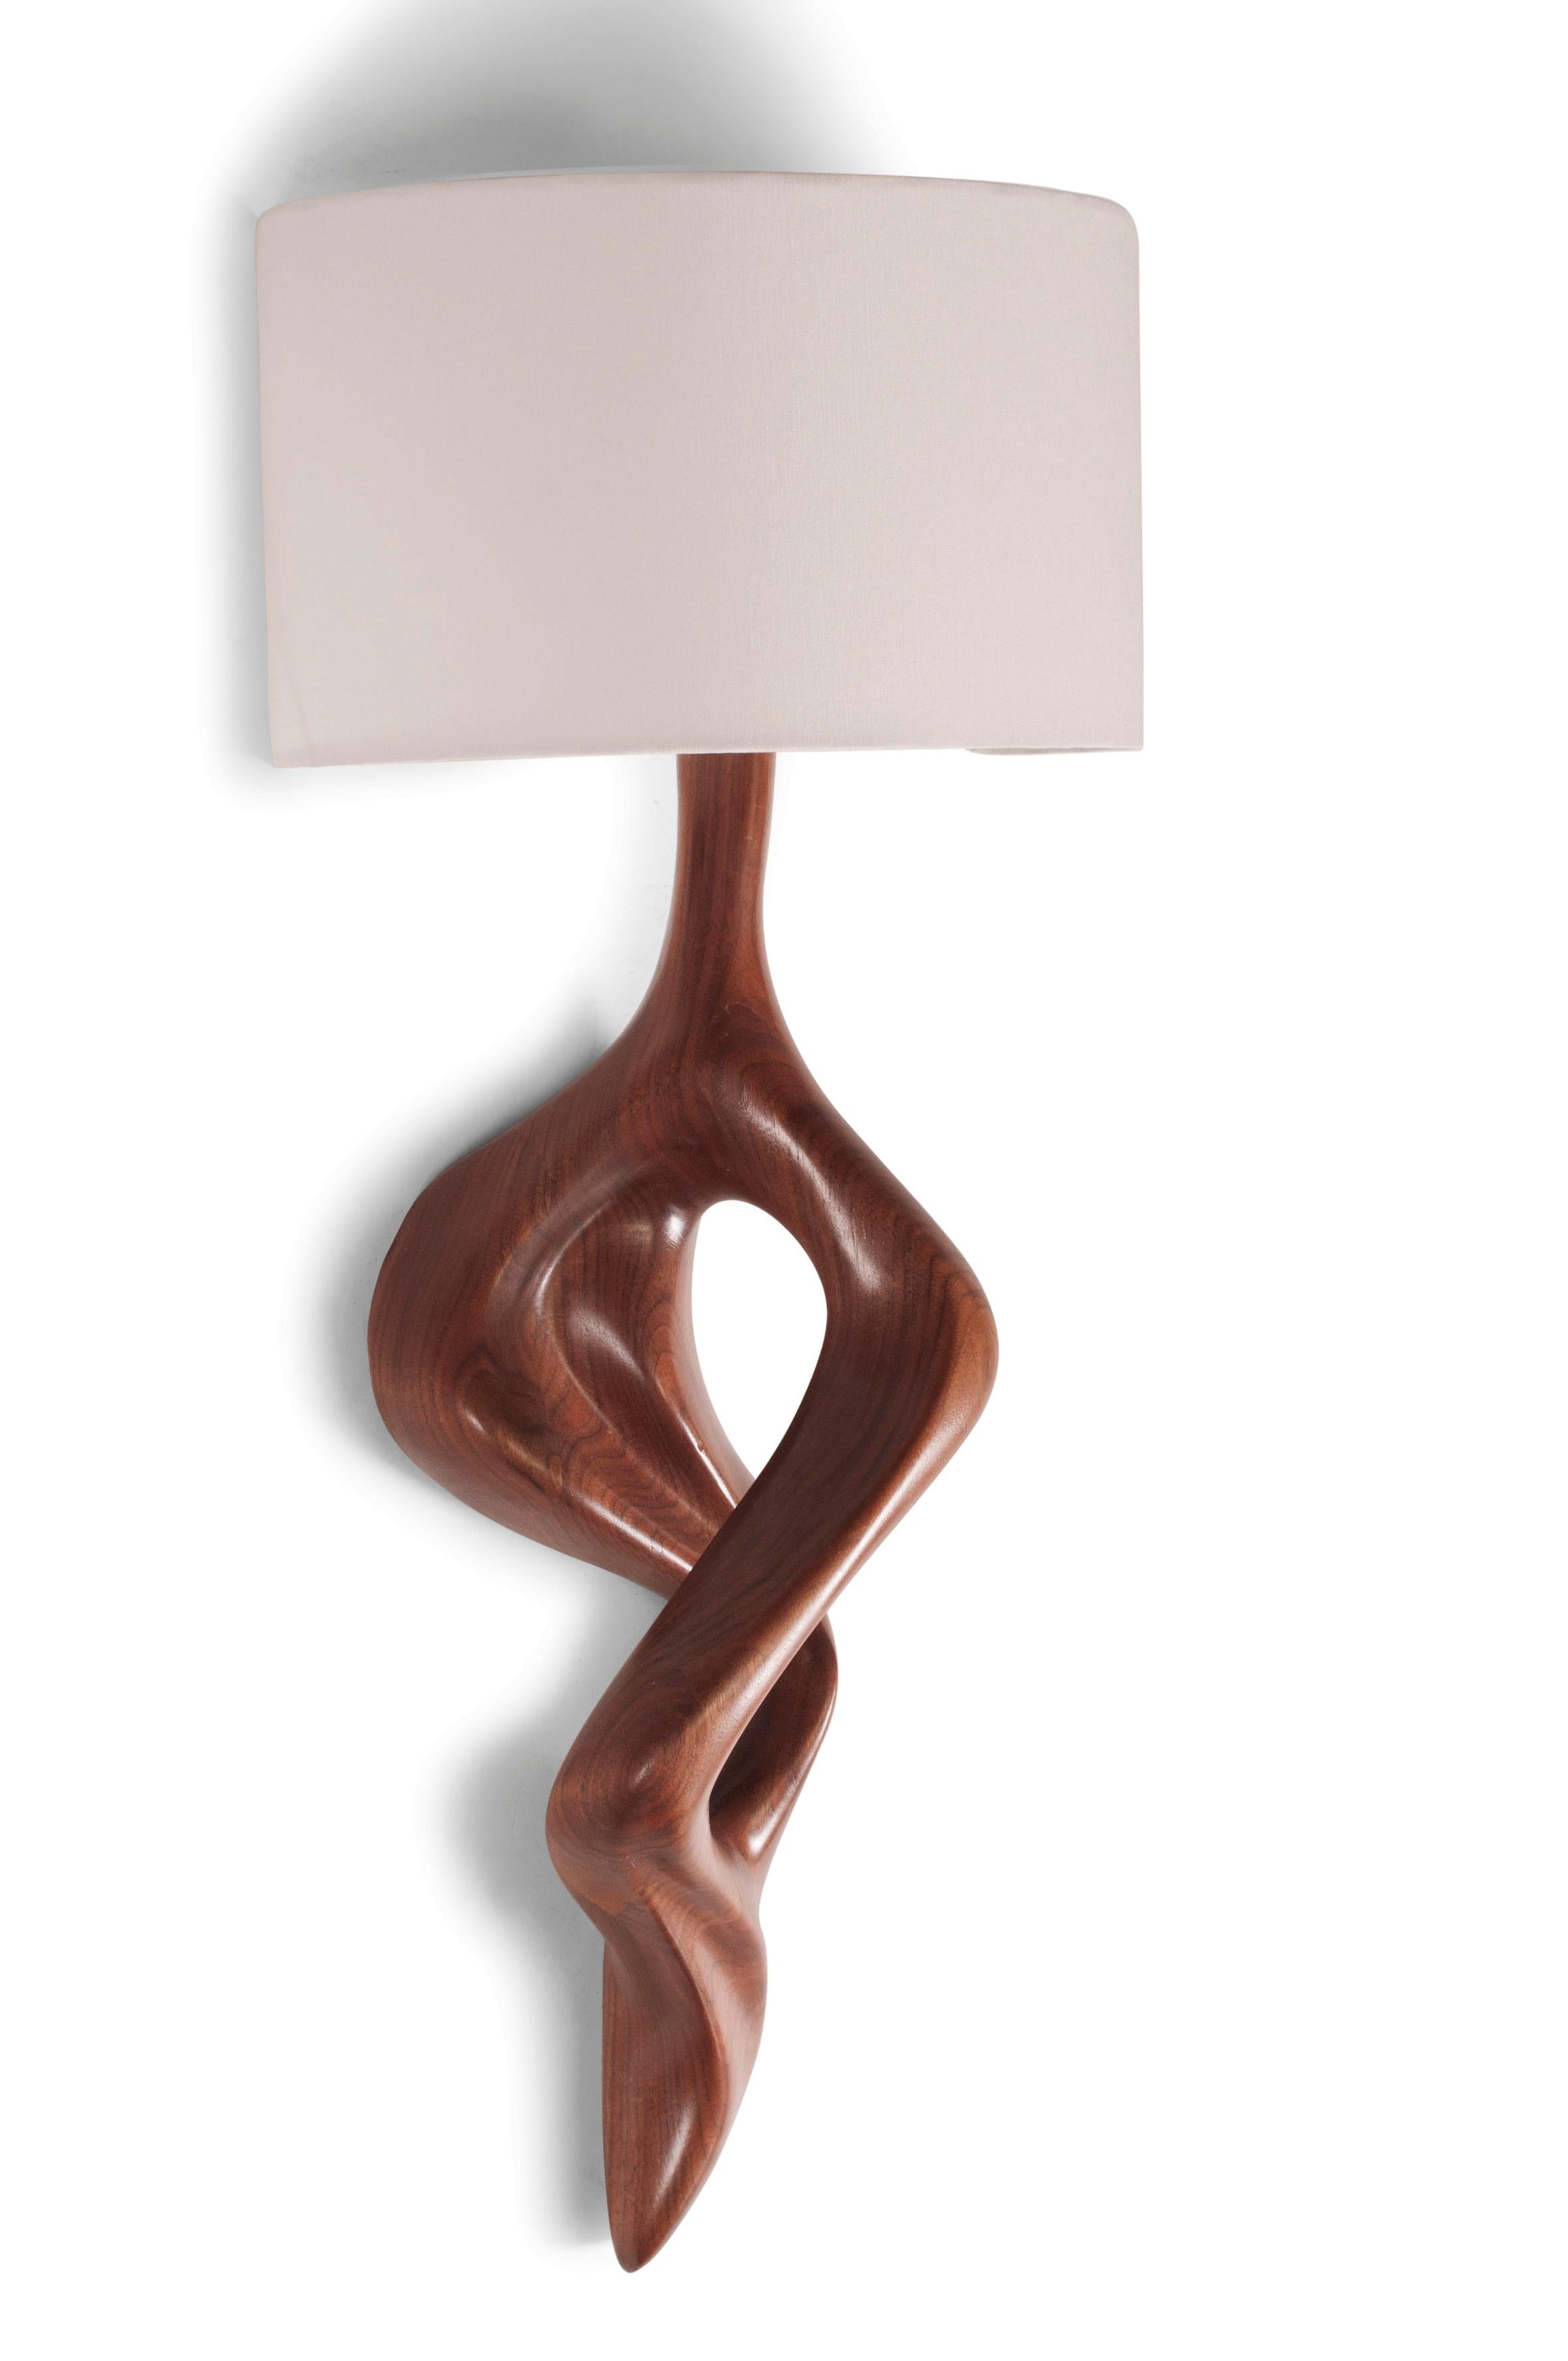 Carved Amorph Nomi Sconces Natural stain on Walnut wood with Ivory Shade For Sale